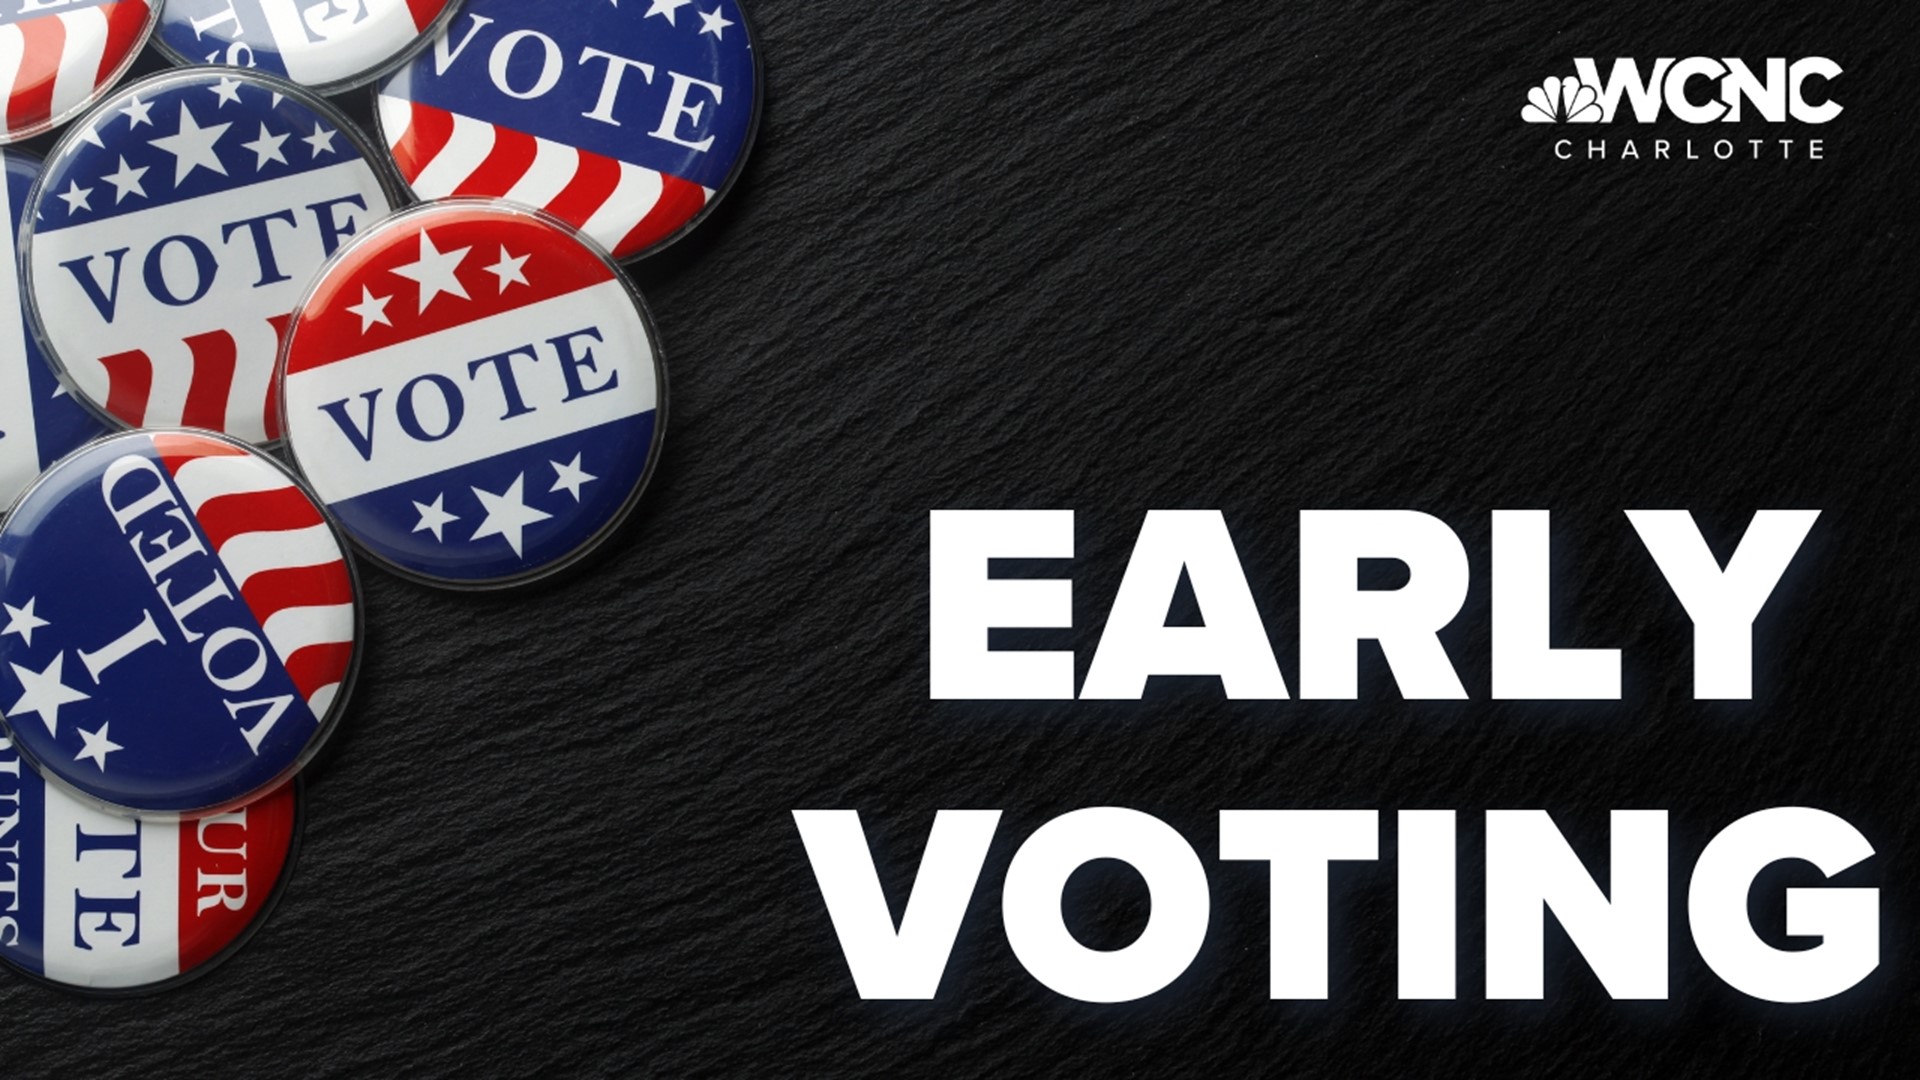 Early voting started a week ago and so far the voter turnout in North Carolina is higher than it was the time during the last midterm election in 2018.